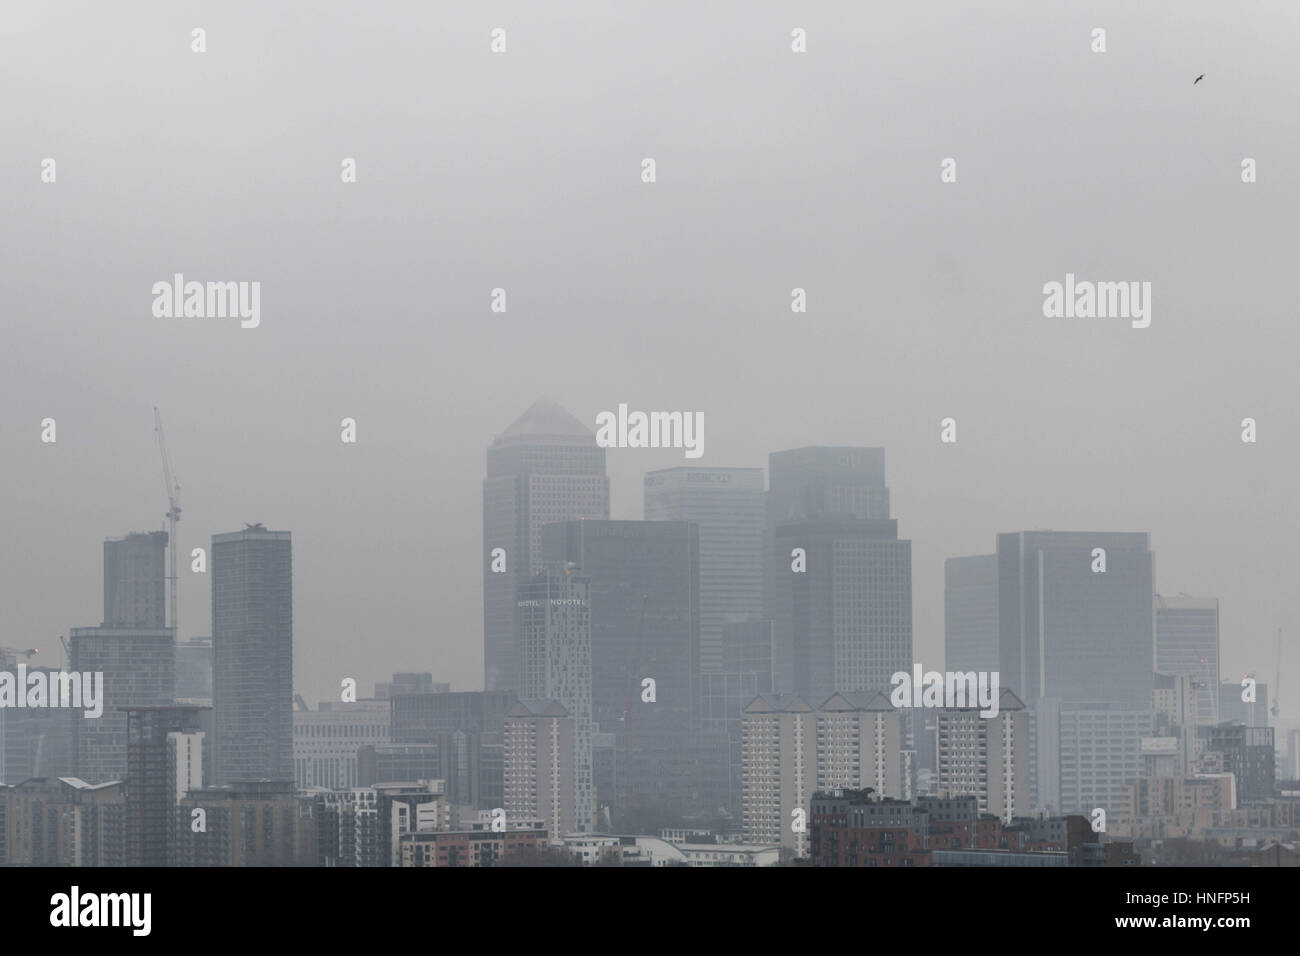 London, UK. 12th February, 2017. UK Weather: Fog over London and Canary Wharf business park buildings © Guy Corbishley/Alamy Live News Stock Photo